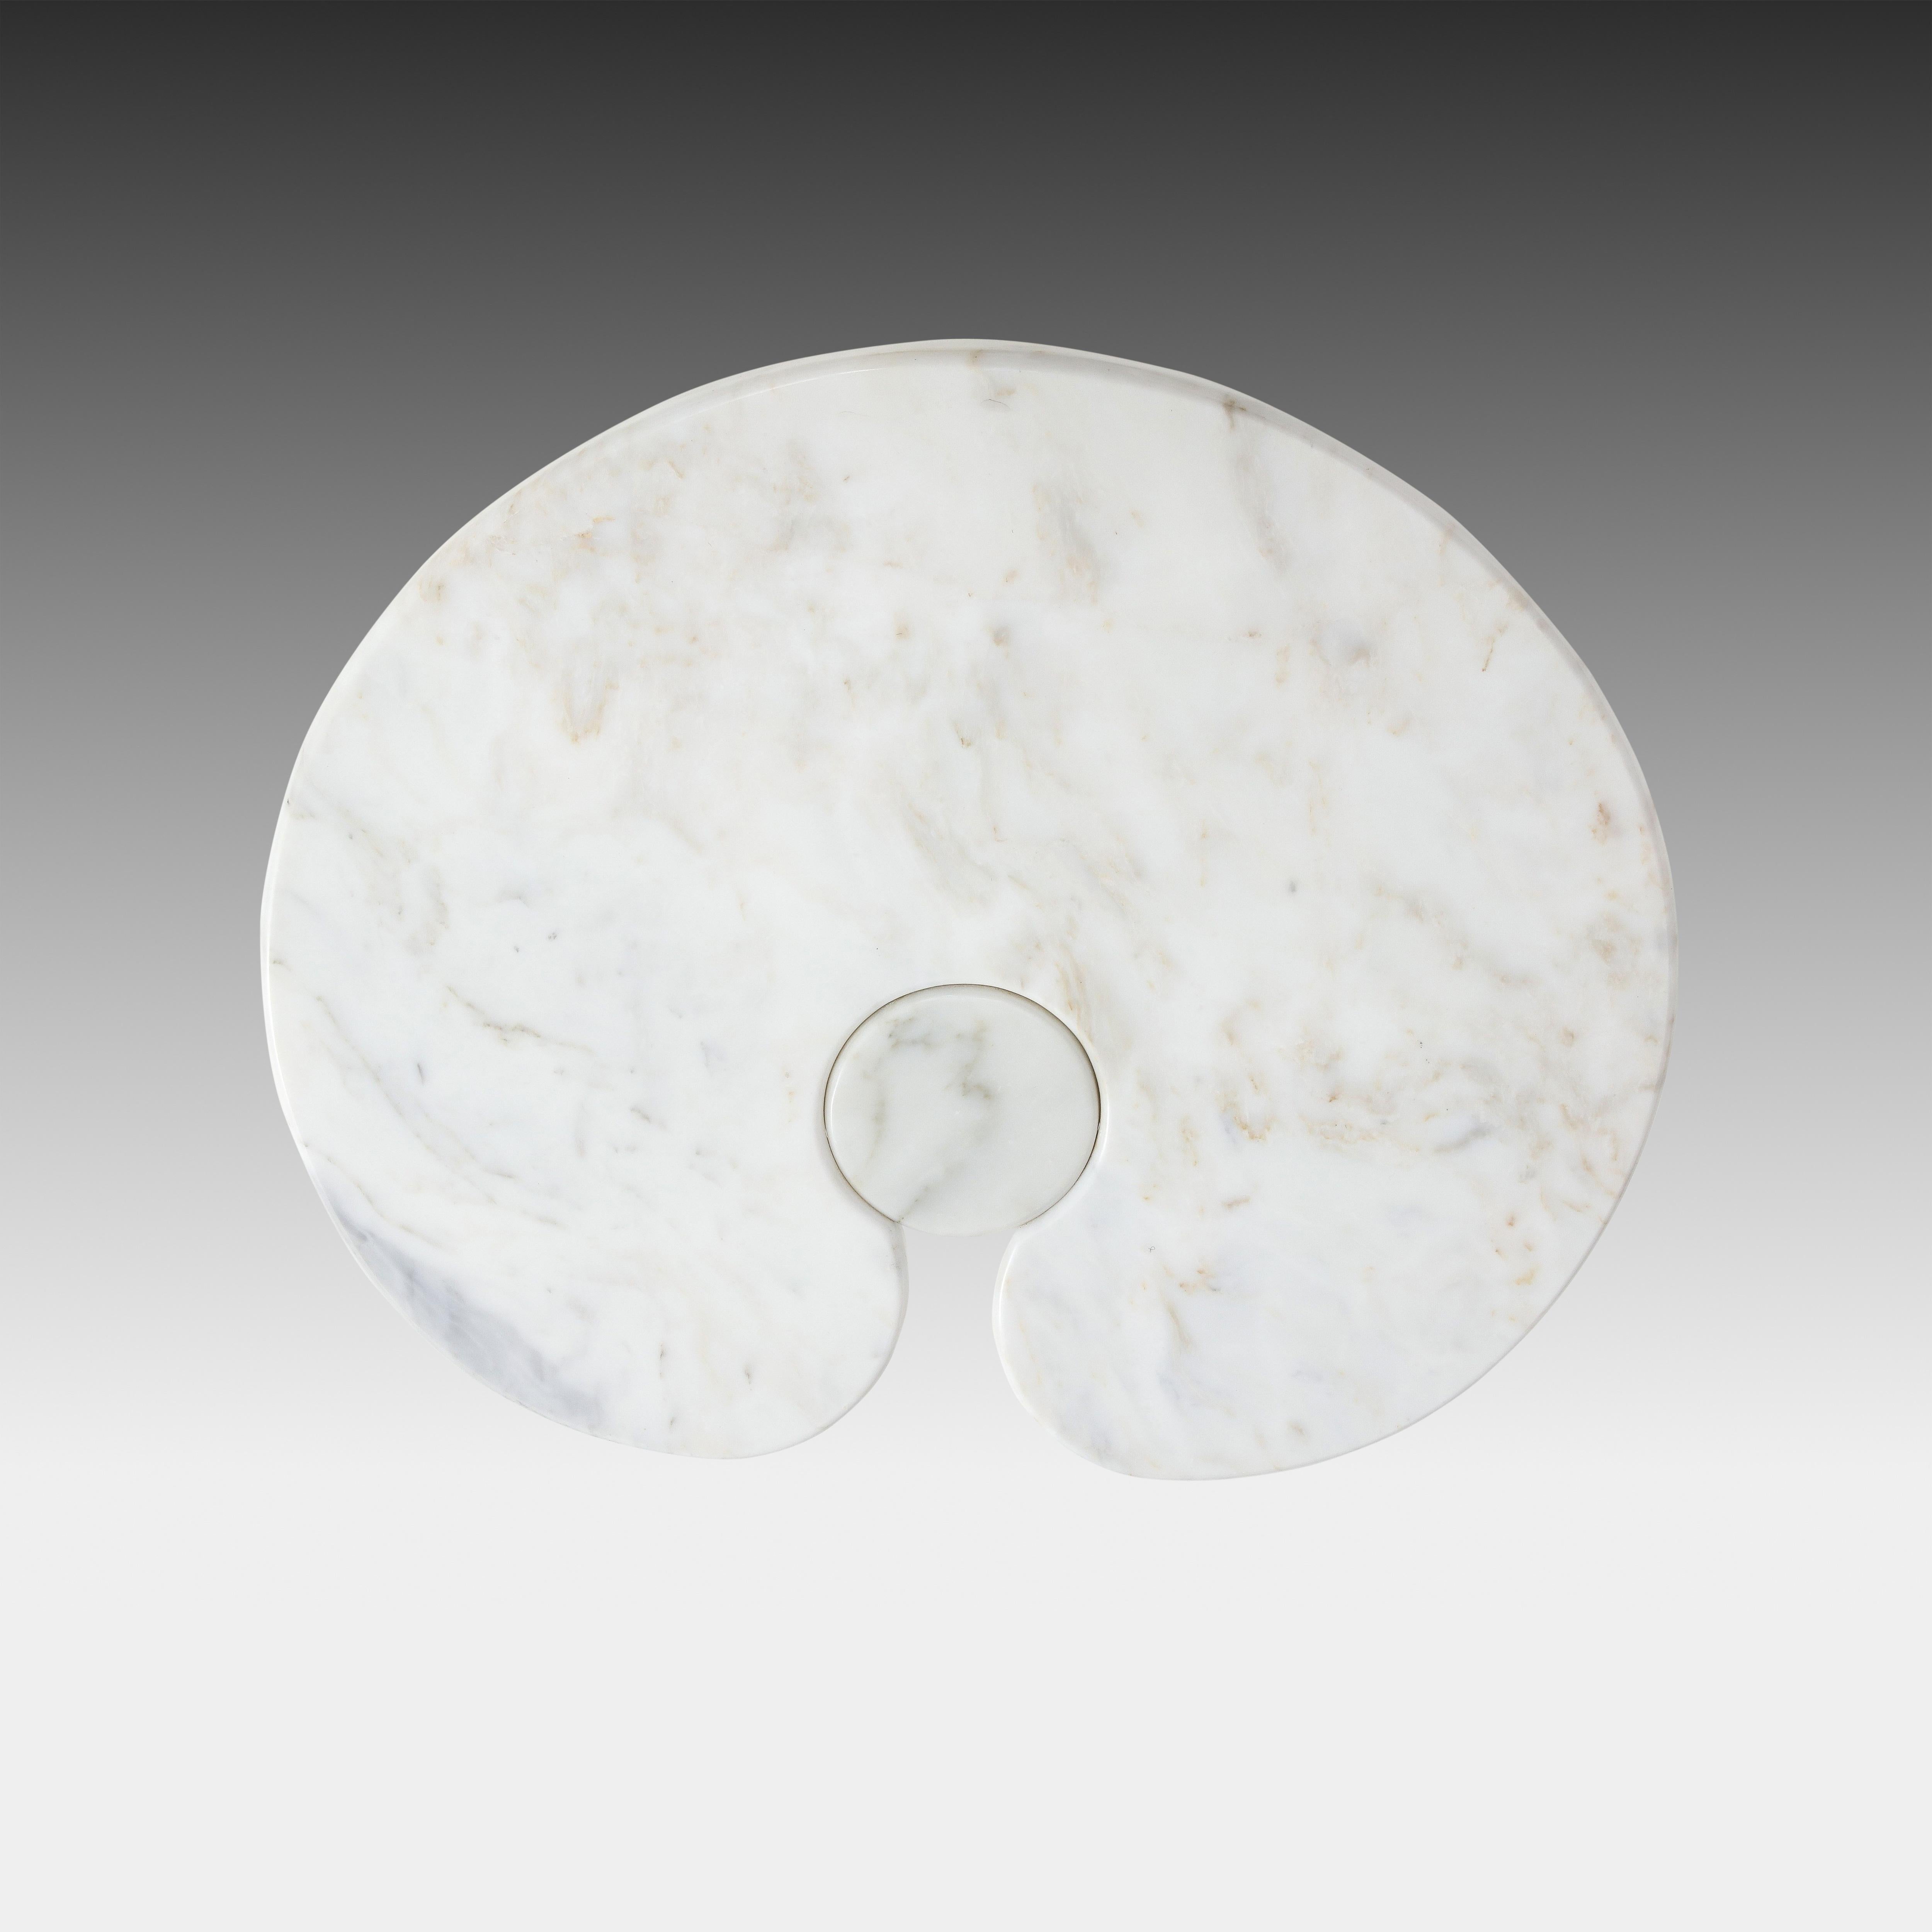 Angelo Mangiarotti Carrara Marble Side Table from 'Eros' Series, 1971 For Sale 1